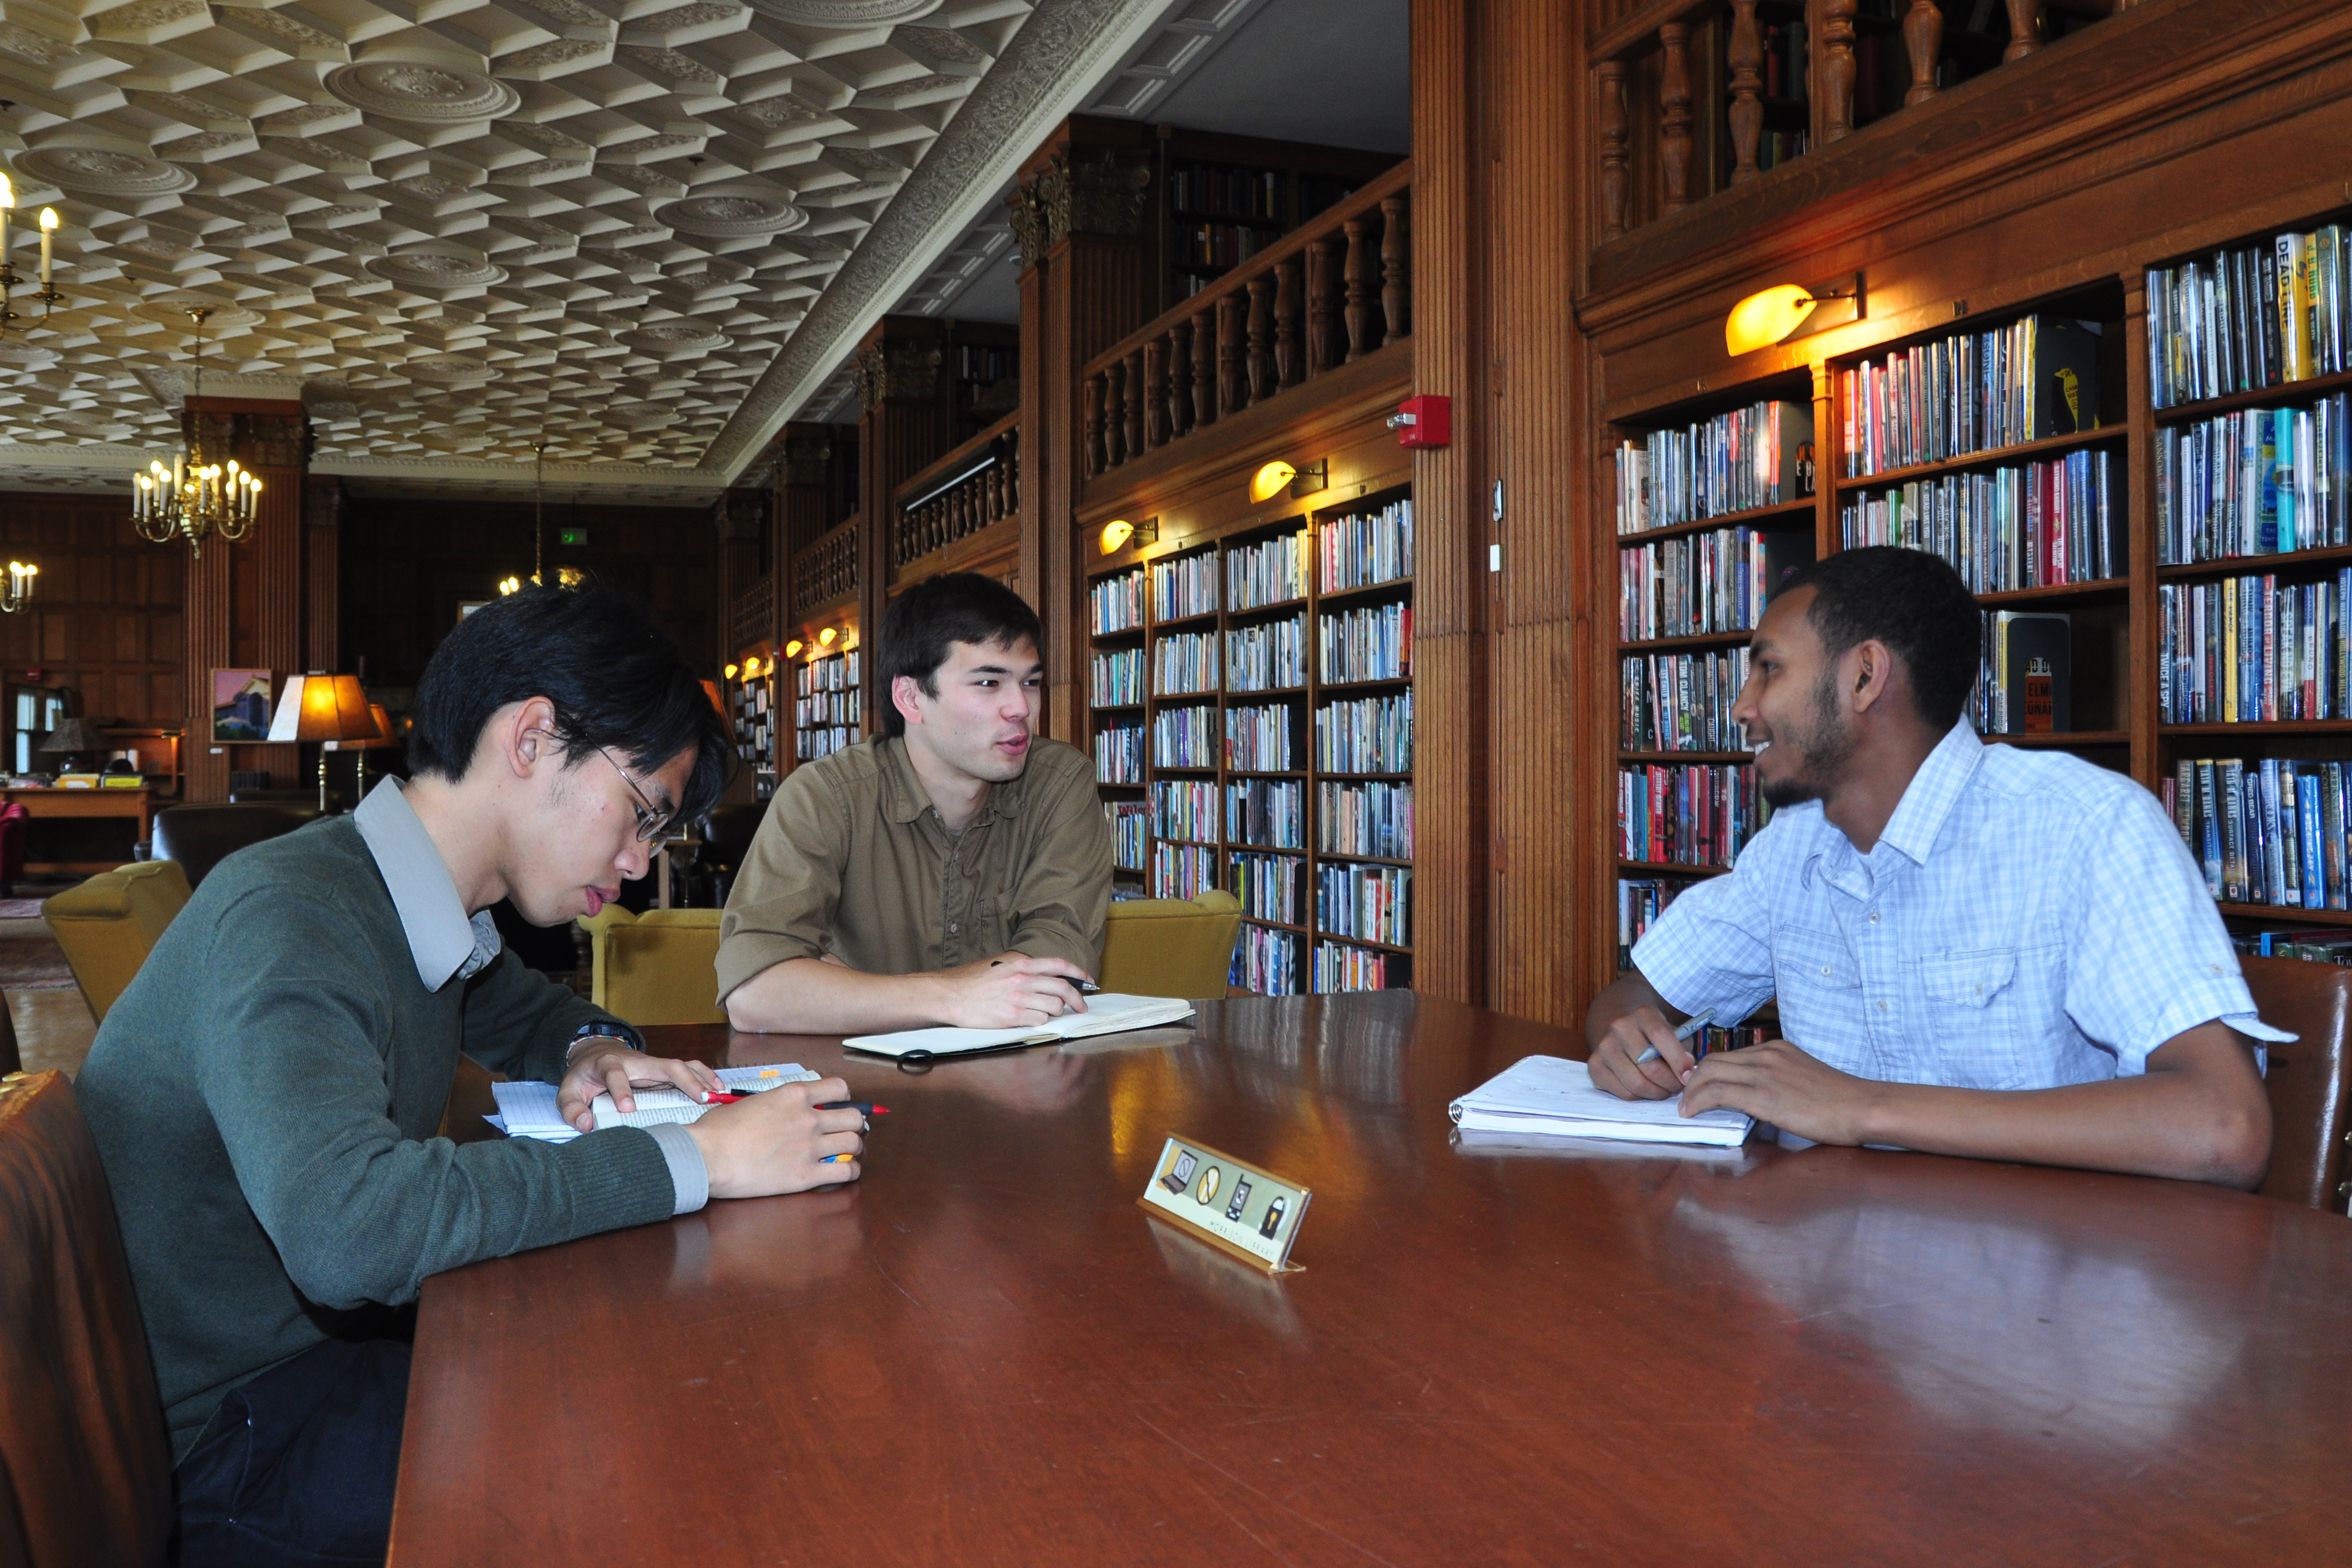 A group of students study together at the library.